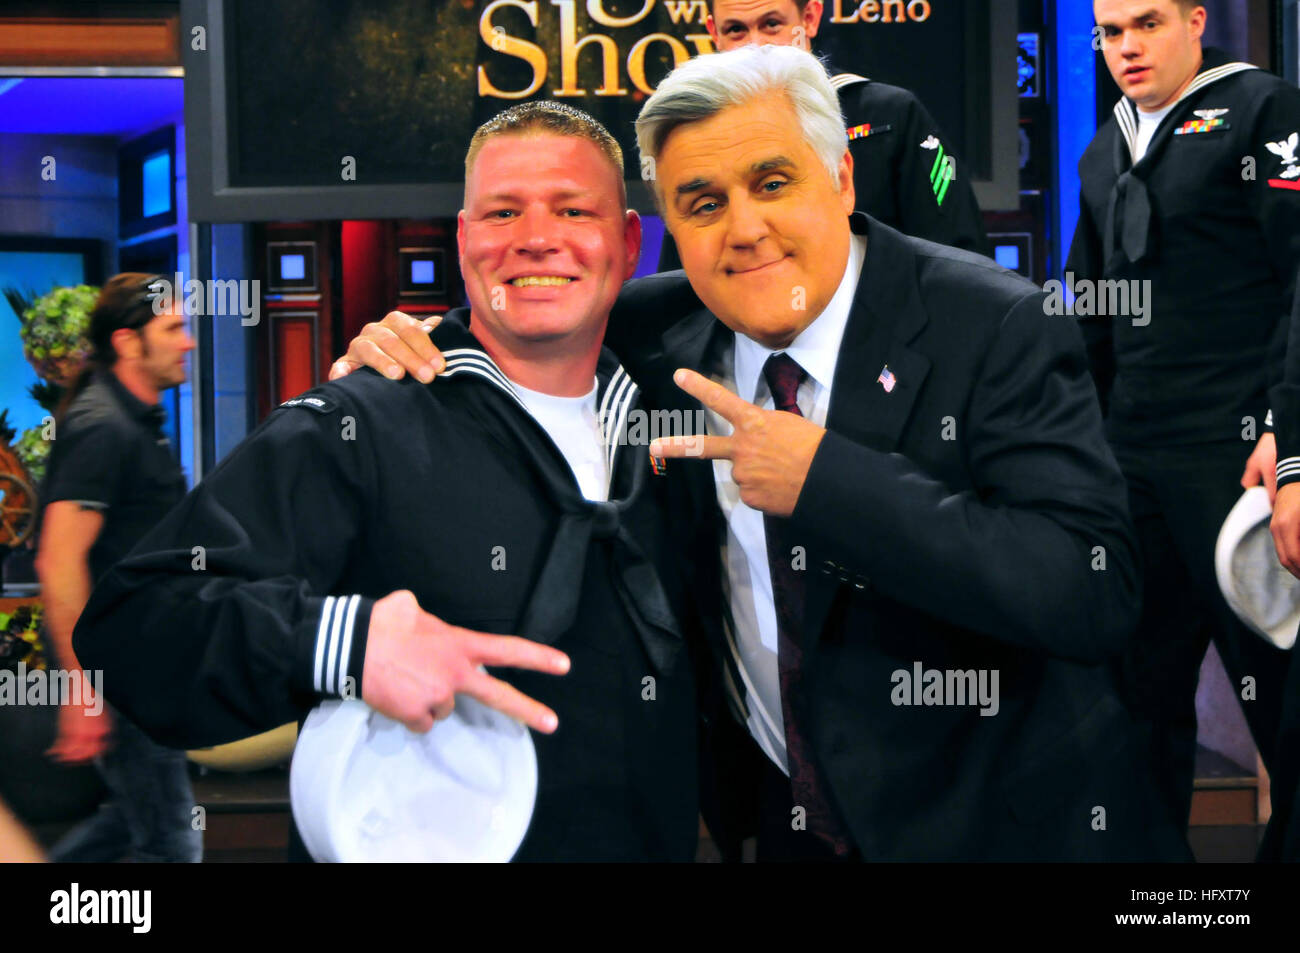 101112-N-7456N-008  BURBANK, Calif. (Nov. 12, 2010) Logistics Specialist 2nd Class Jeremy Bernier, assigned to the aircraft carrier USS Carl Vinson (CVN 70), poses for a photo with The Tonight Show's host Jay Leno after a filming of the show. (U.S. Navy photo by Mass Communication Specialist 3rd Class Joshua R. Nistas/Released) US Navy 101112-N-7456N-008 Logistics Specialist 2nd Class Jeremy Bernier, assigned to the aircraft carrier USS Carl Vinson (CVN 70) Stock Photo